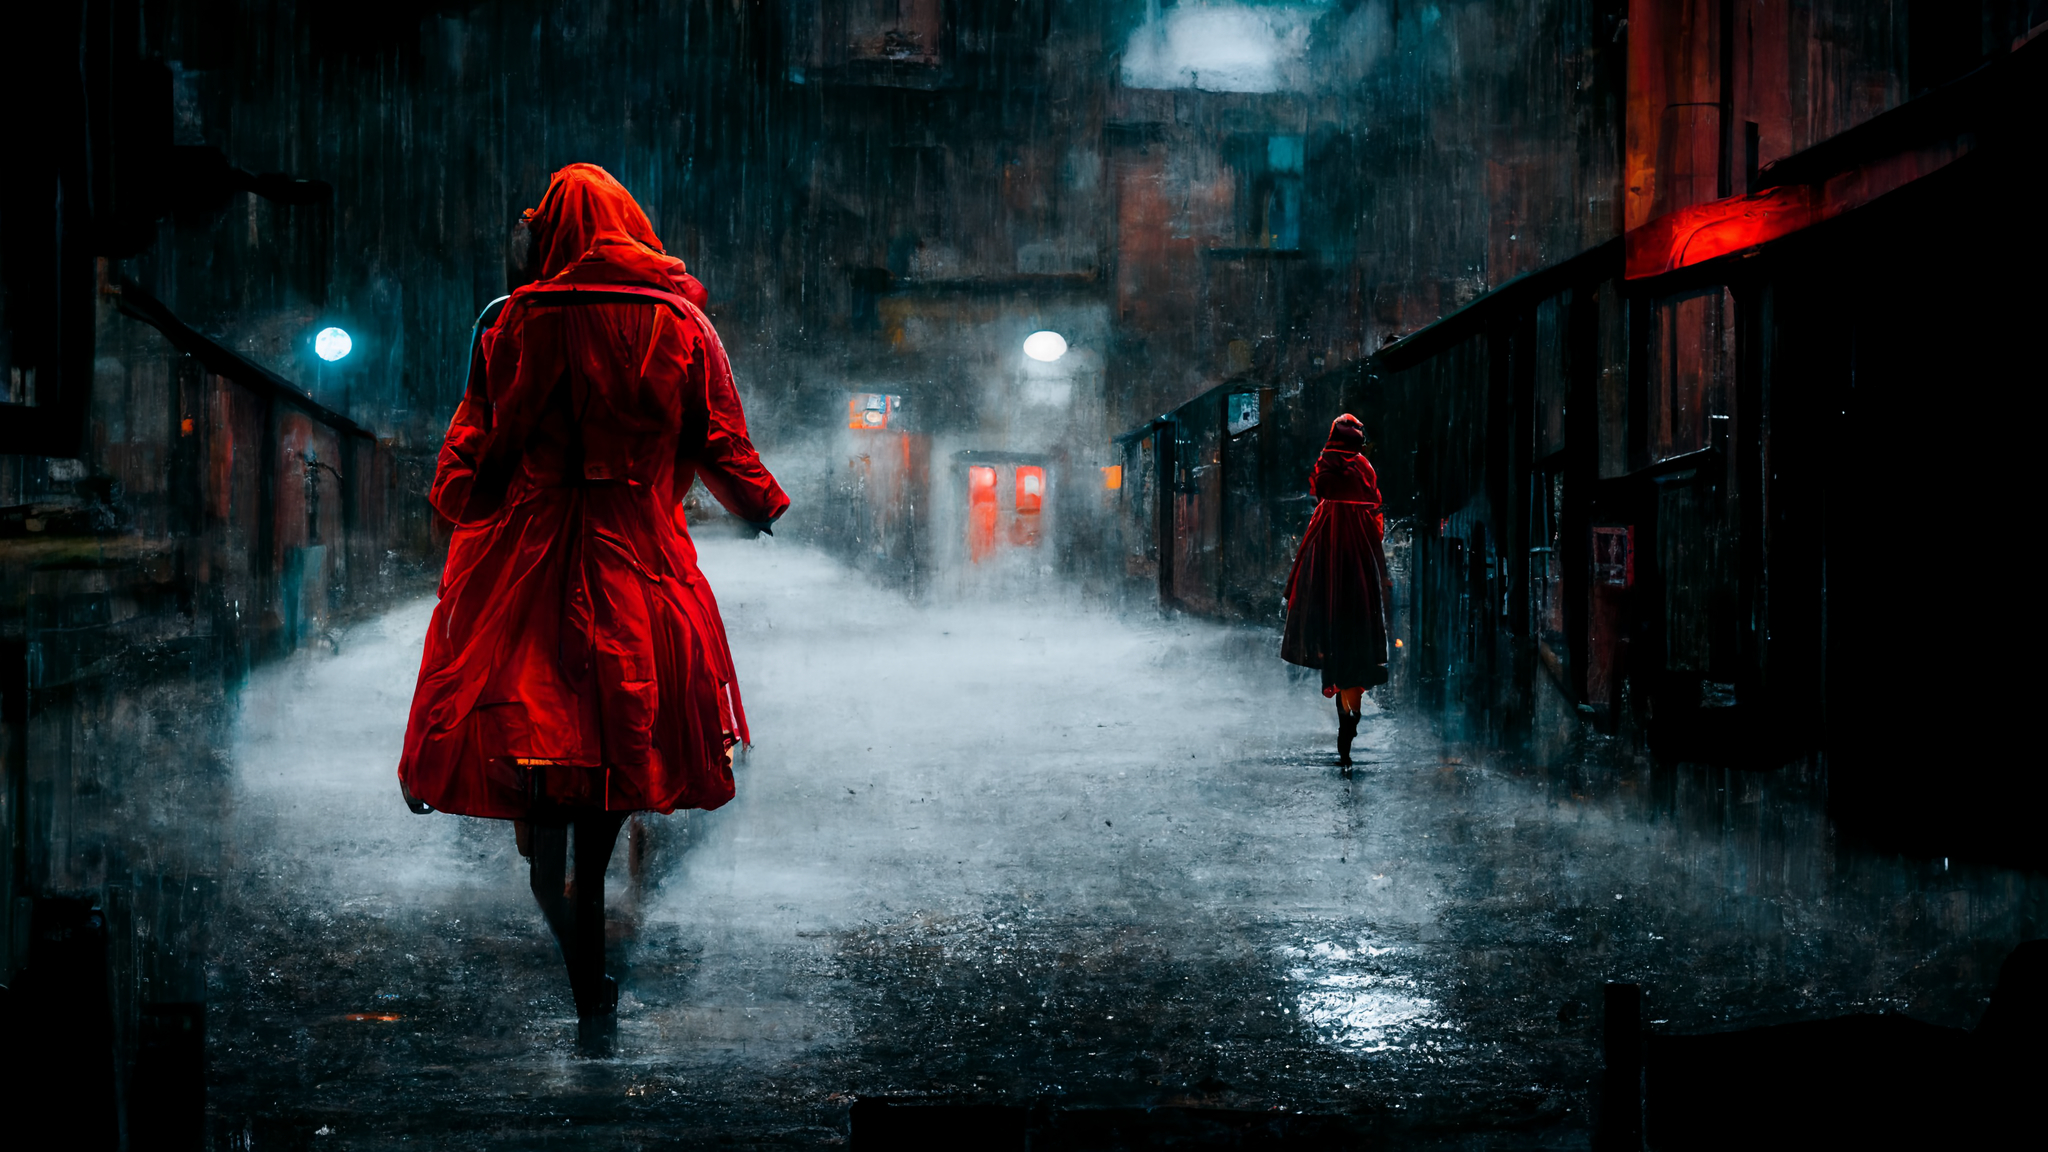 2048x1152 2048 x 1152] Not so Little Red Riding Hood. Created by me using Midjourney AI. : r/wallpaper